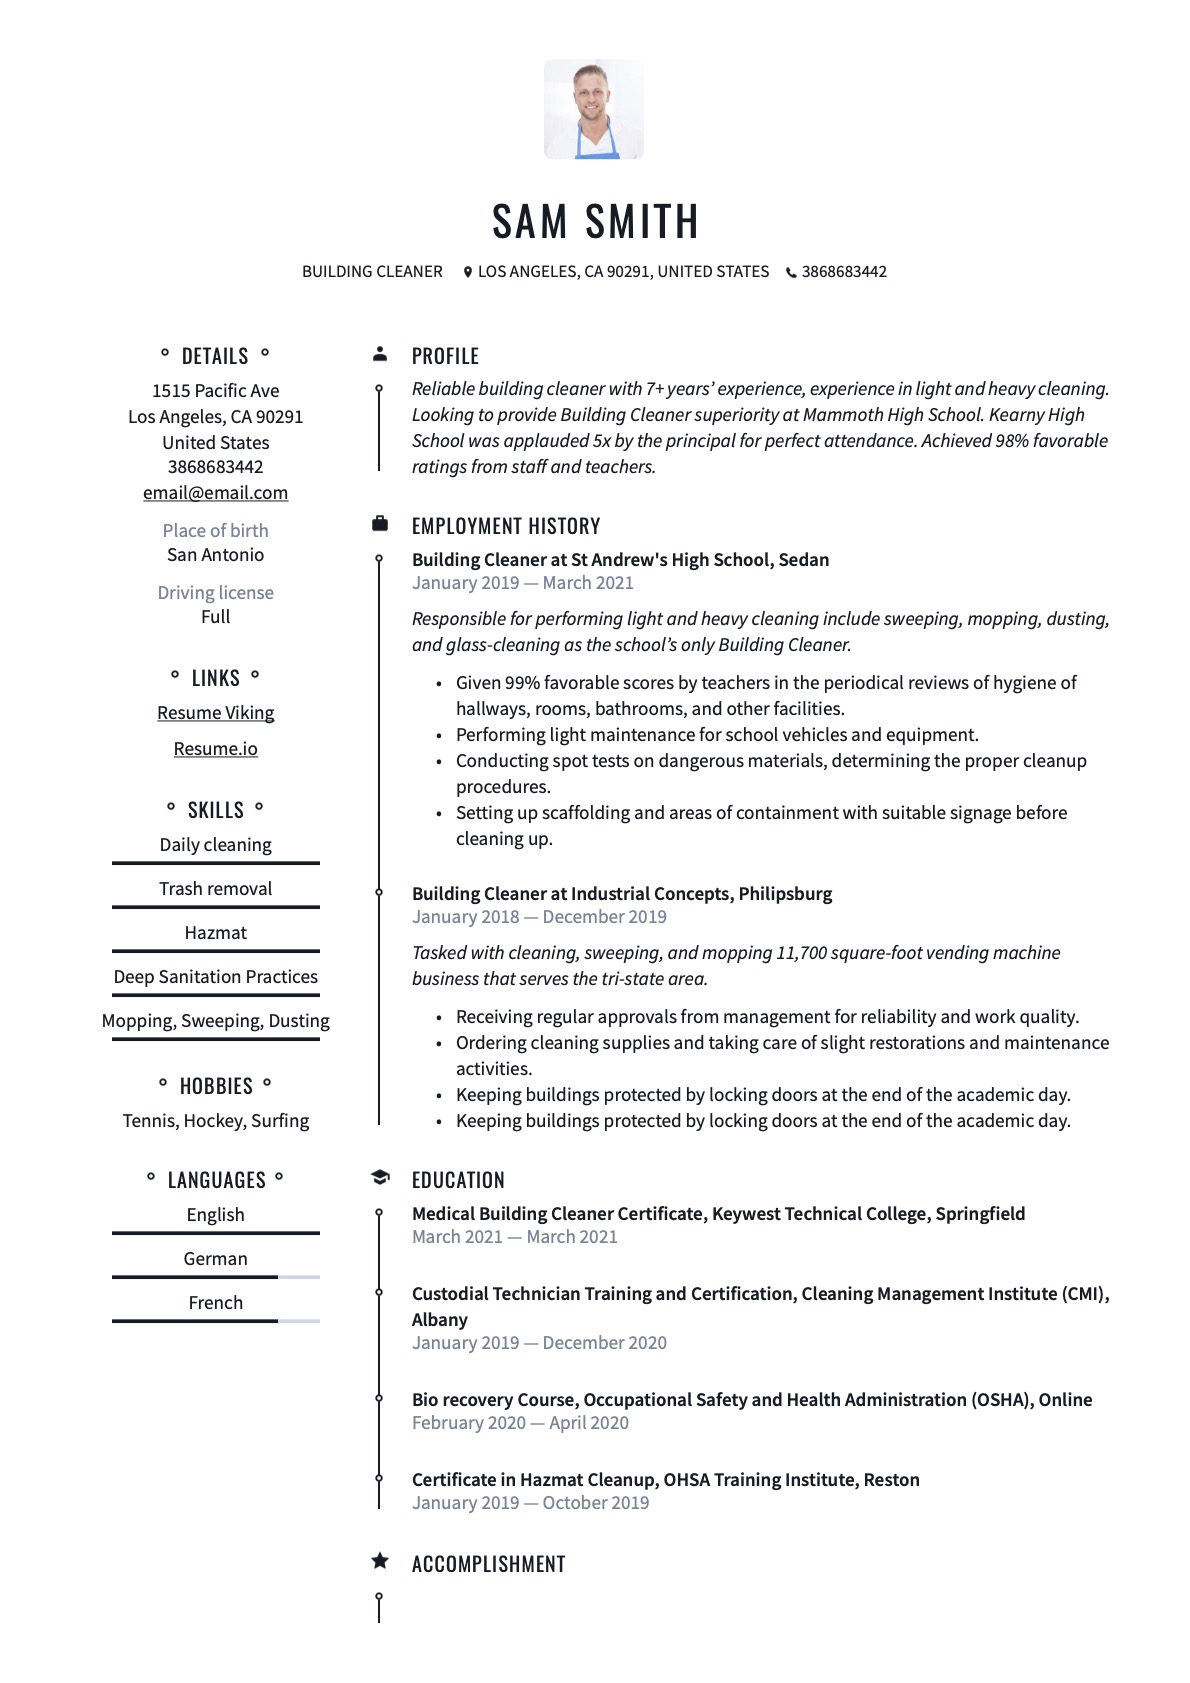 Example Resume Building Cleaner-2